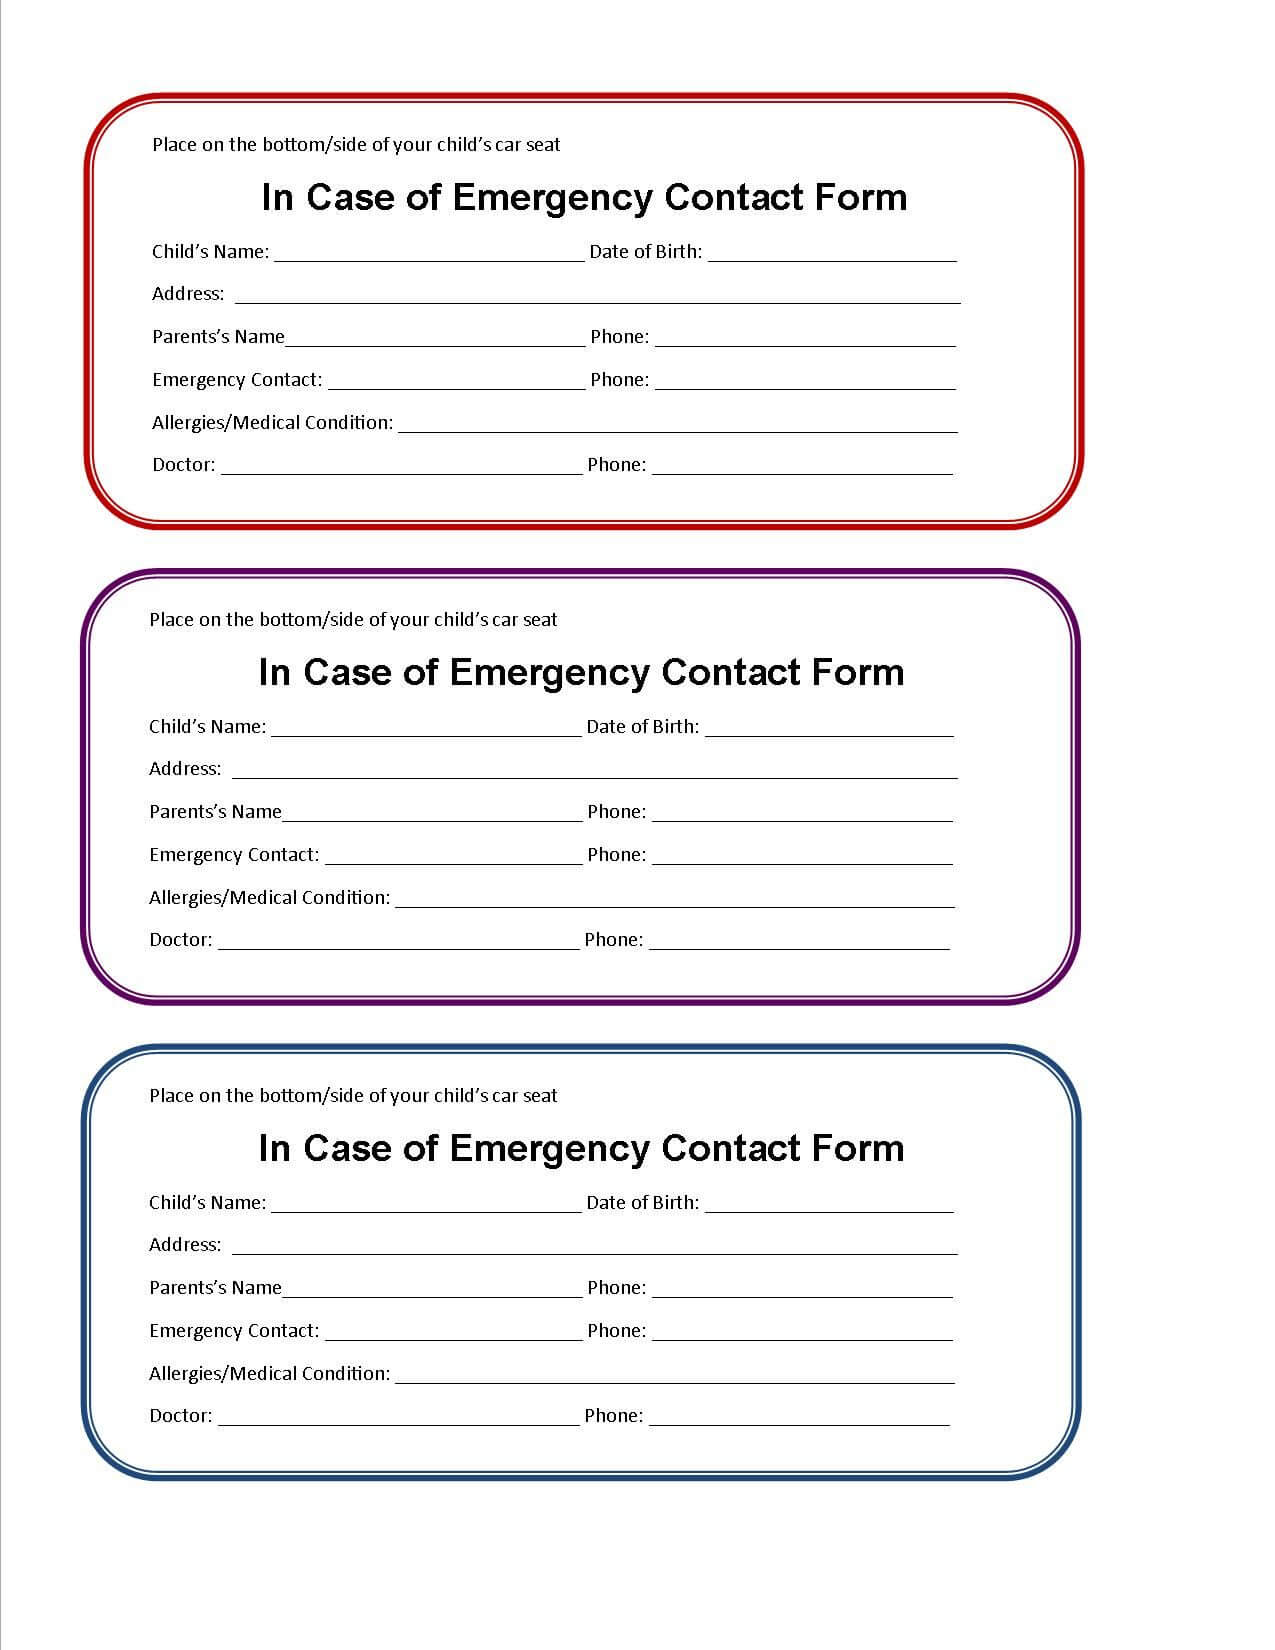 Printable Emergency Contact Form For Car Seat | Emergency Intended For In Case Of Emergency Card Template